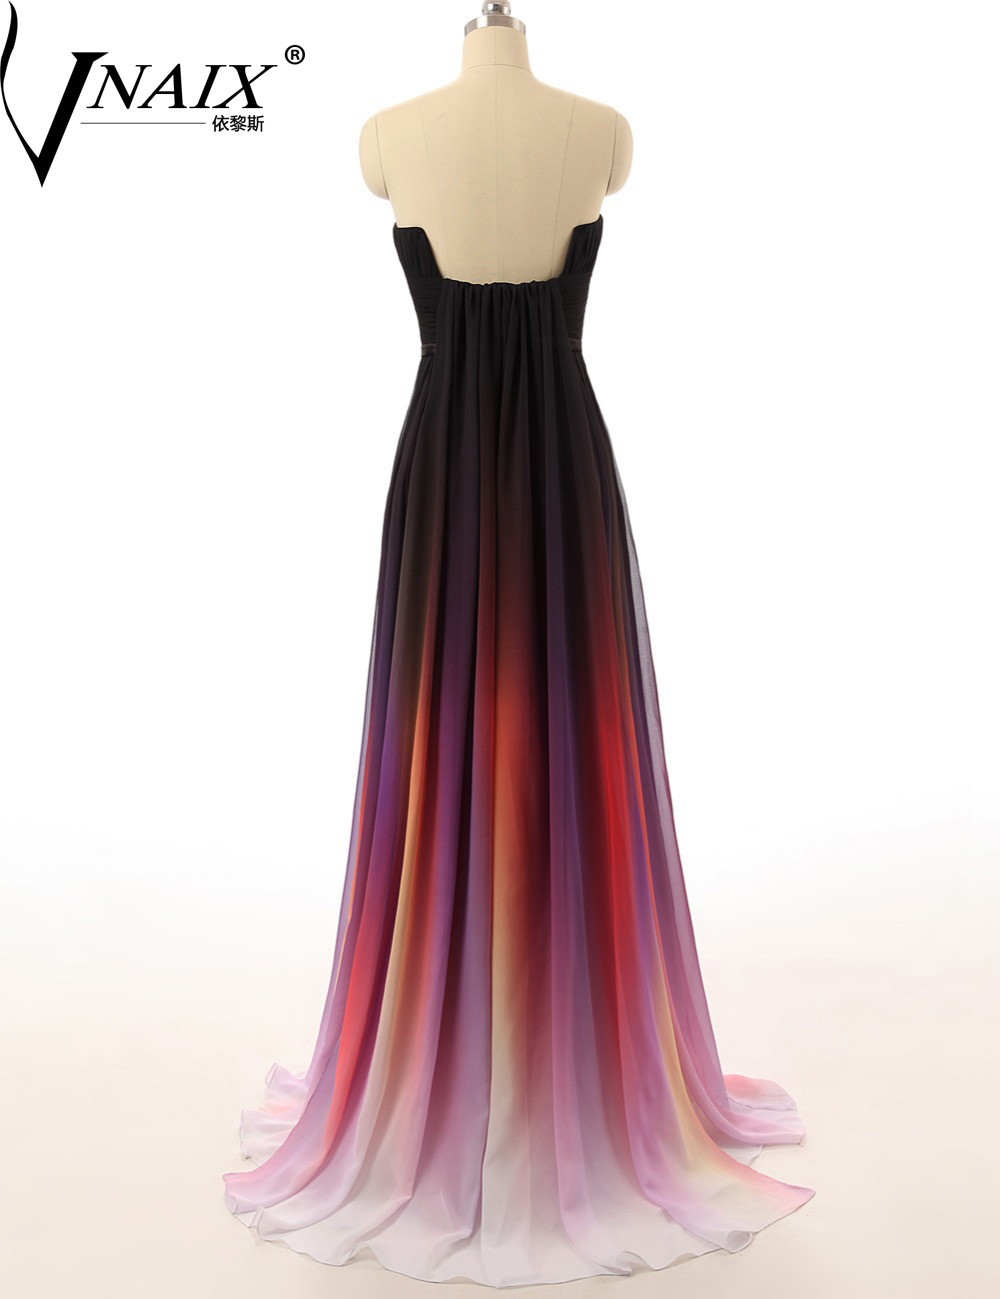 Real Photo In Stock Gradient Ombre Evening Dresses Strapless With Pleat Long Chiffon A Line 6004